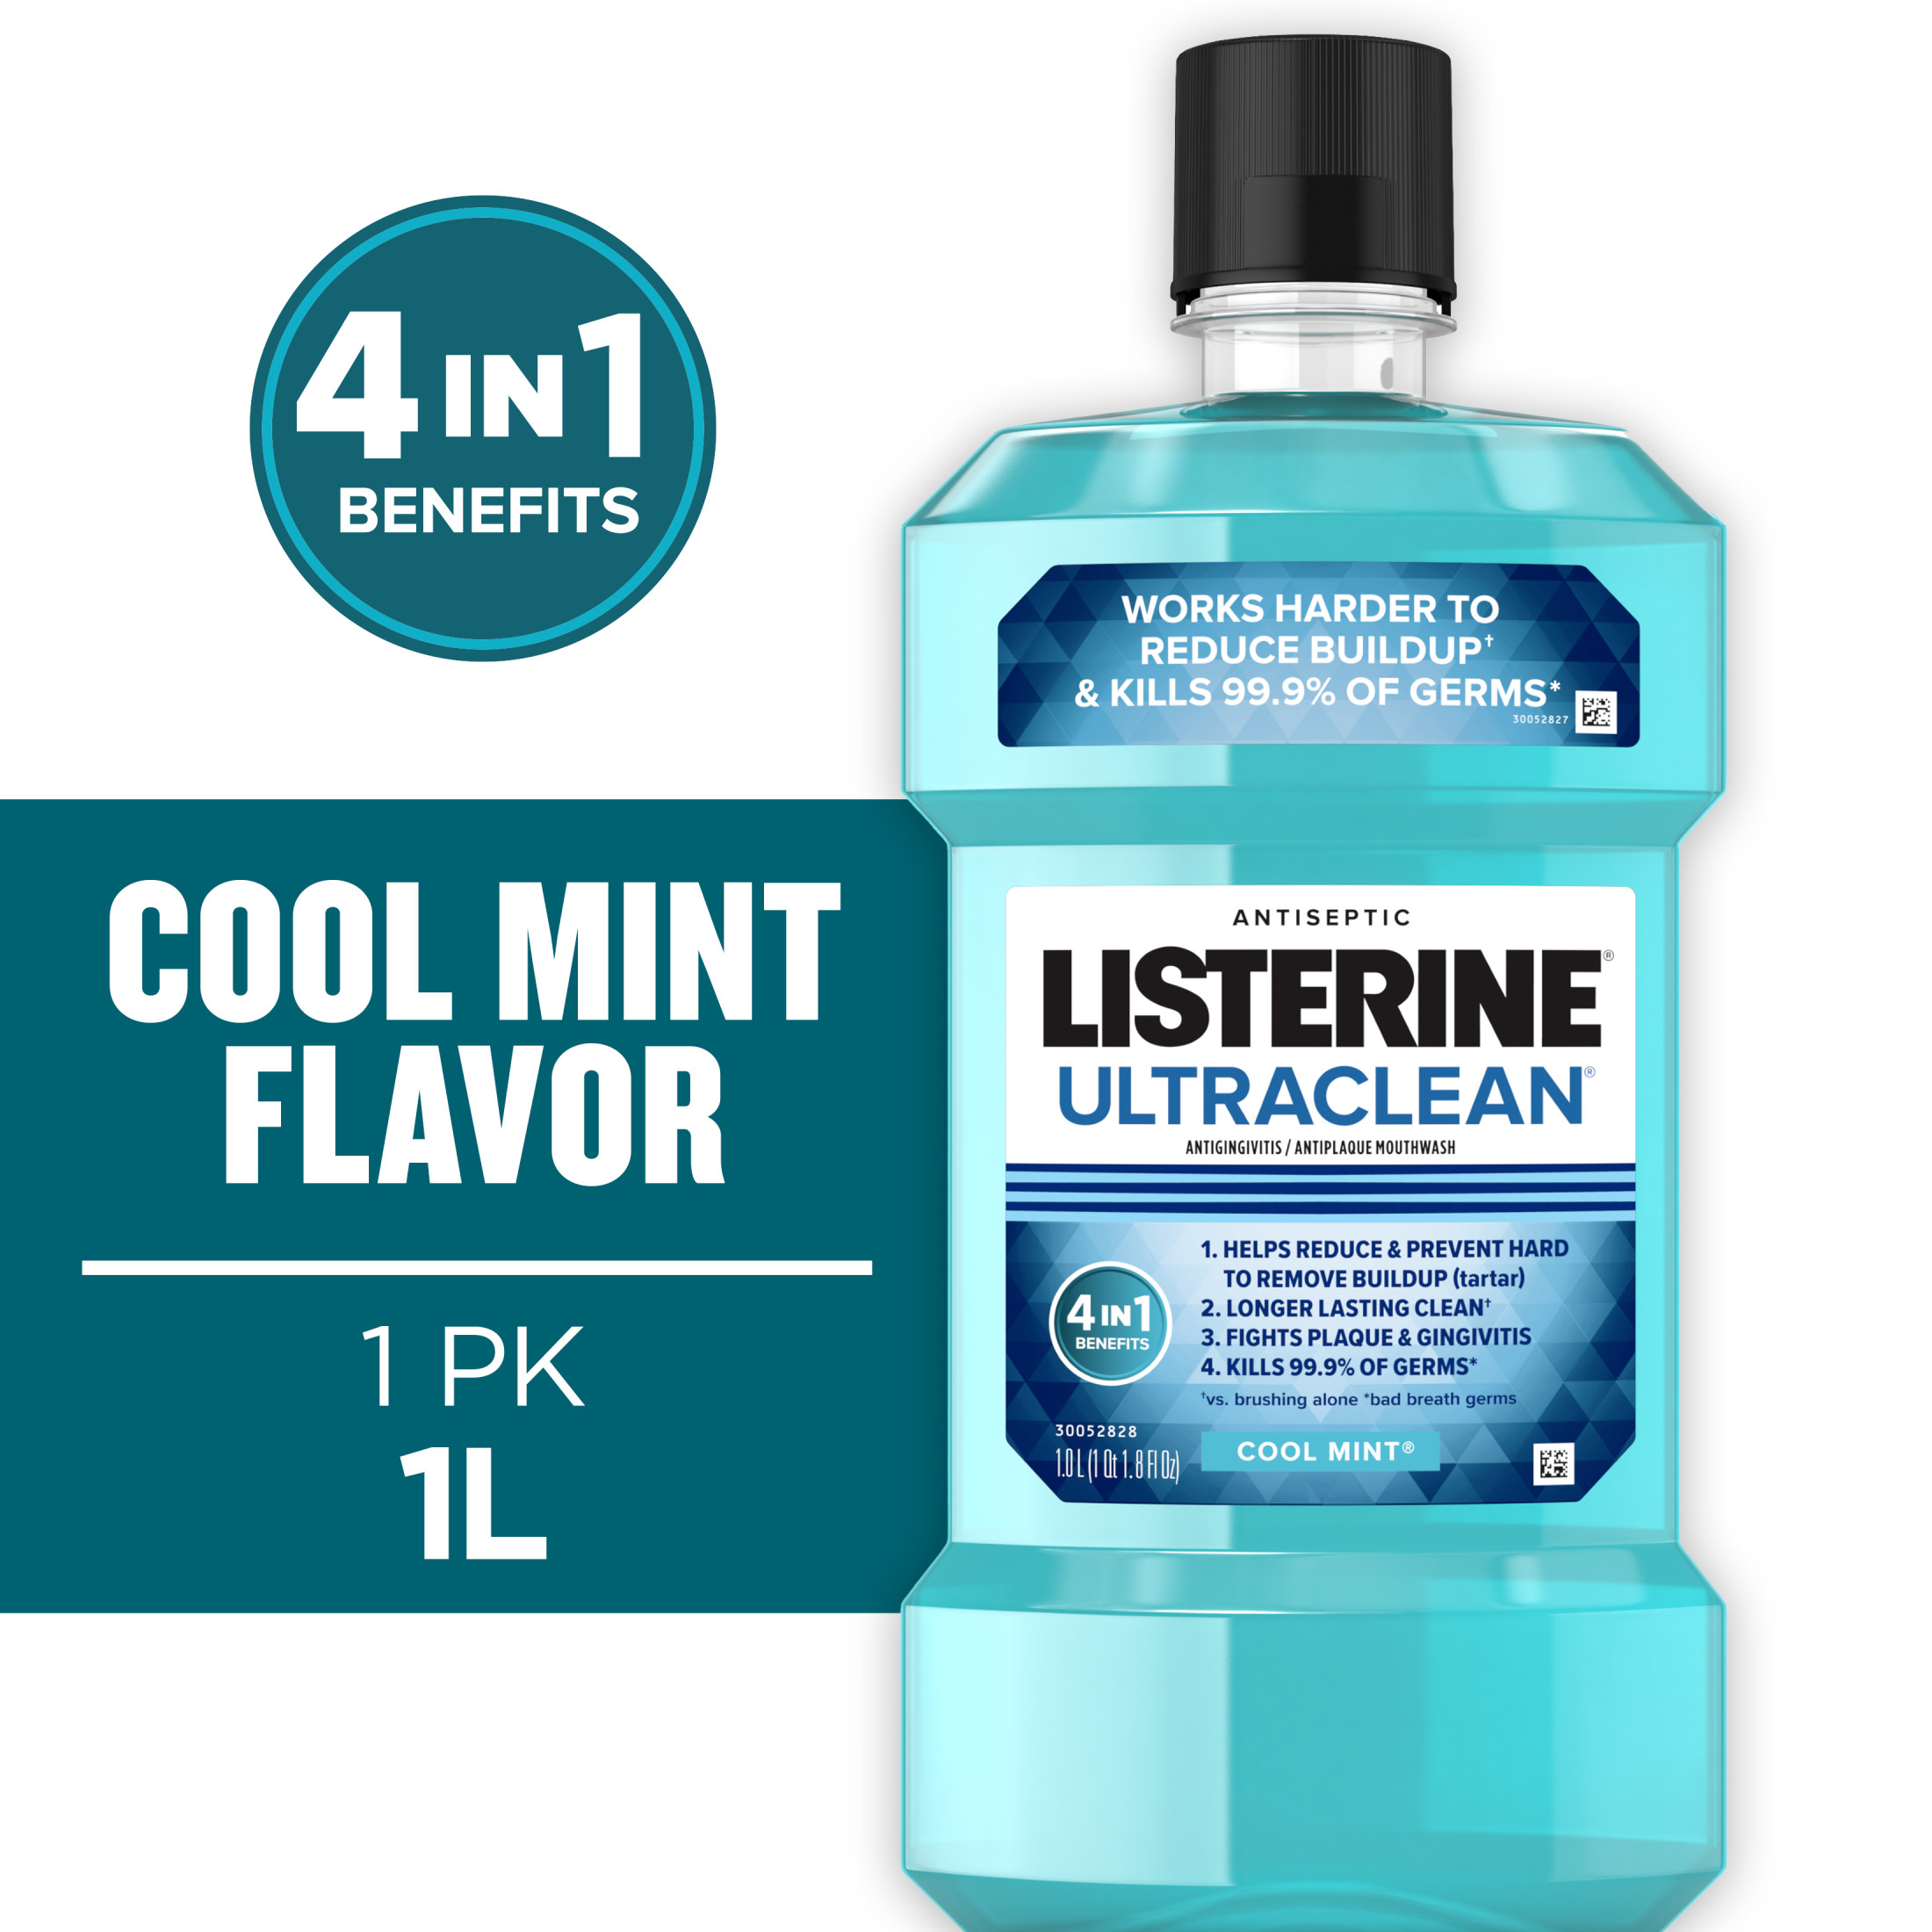 Listerine Ultraclean Antiseptic Mouthwash, Oral Care for Gingivitis, Cool Mint, 1 L - image 1 of 10